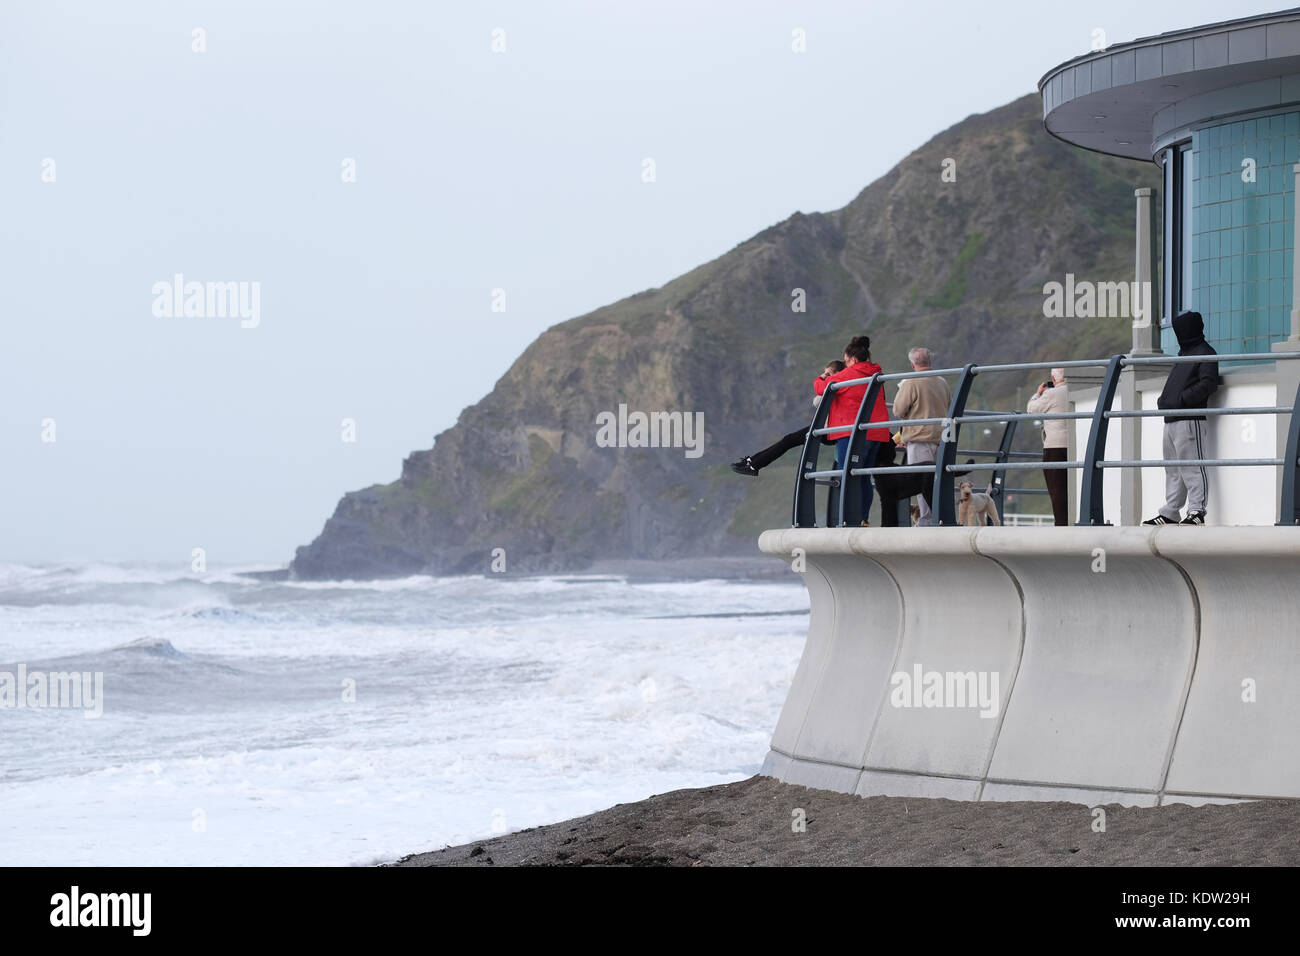 Aberystwyth, Ceredigion, Wales, UK  - 4pm People begin to gather to as high tide approaches ( due approx 18.30 ) at the town beach - strong winds at Aberystwyth on the West Wales coast as Storm Ophelia approaches off the Irish Sea with local winds exceeding 50mph. Photo Steven May / Alamy Live News Stock Photo